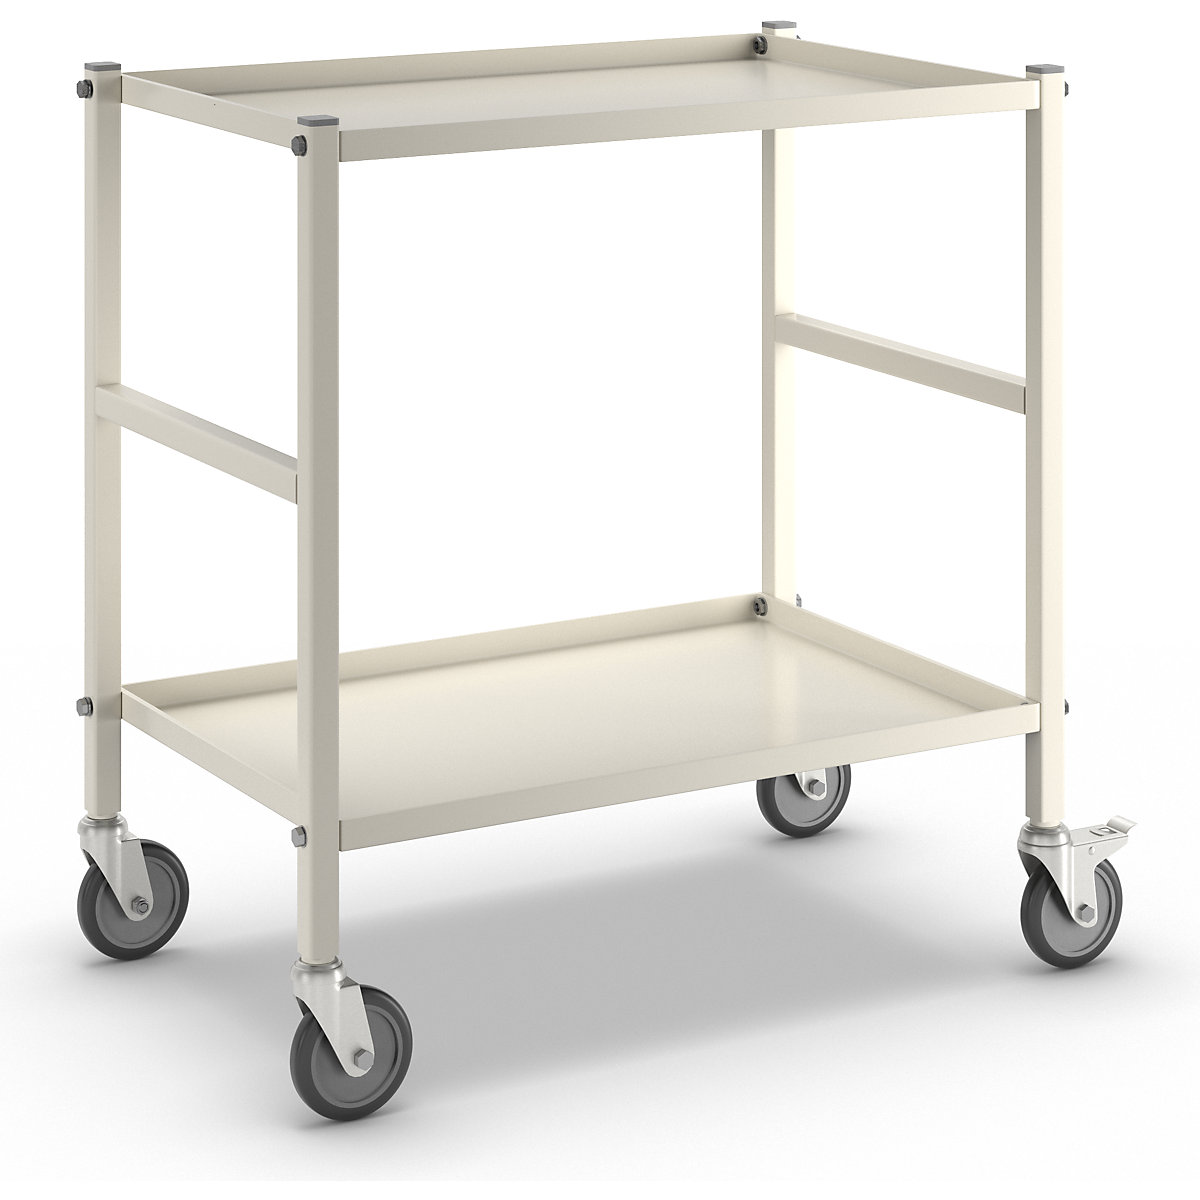 Table trolley with 2 shelves – Kongamek, 4 swivel castors, 2 with stops, white-1